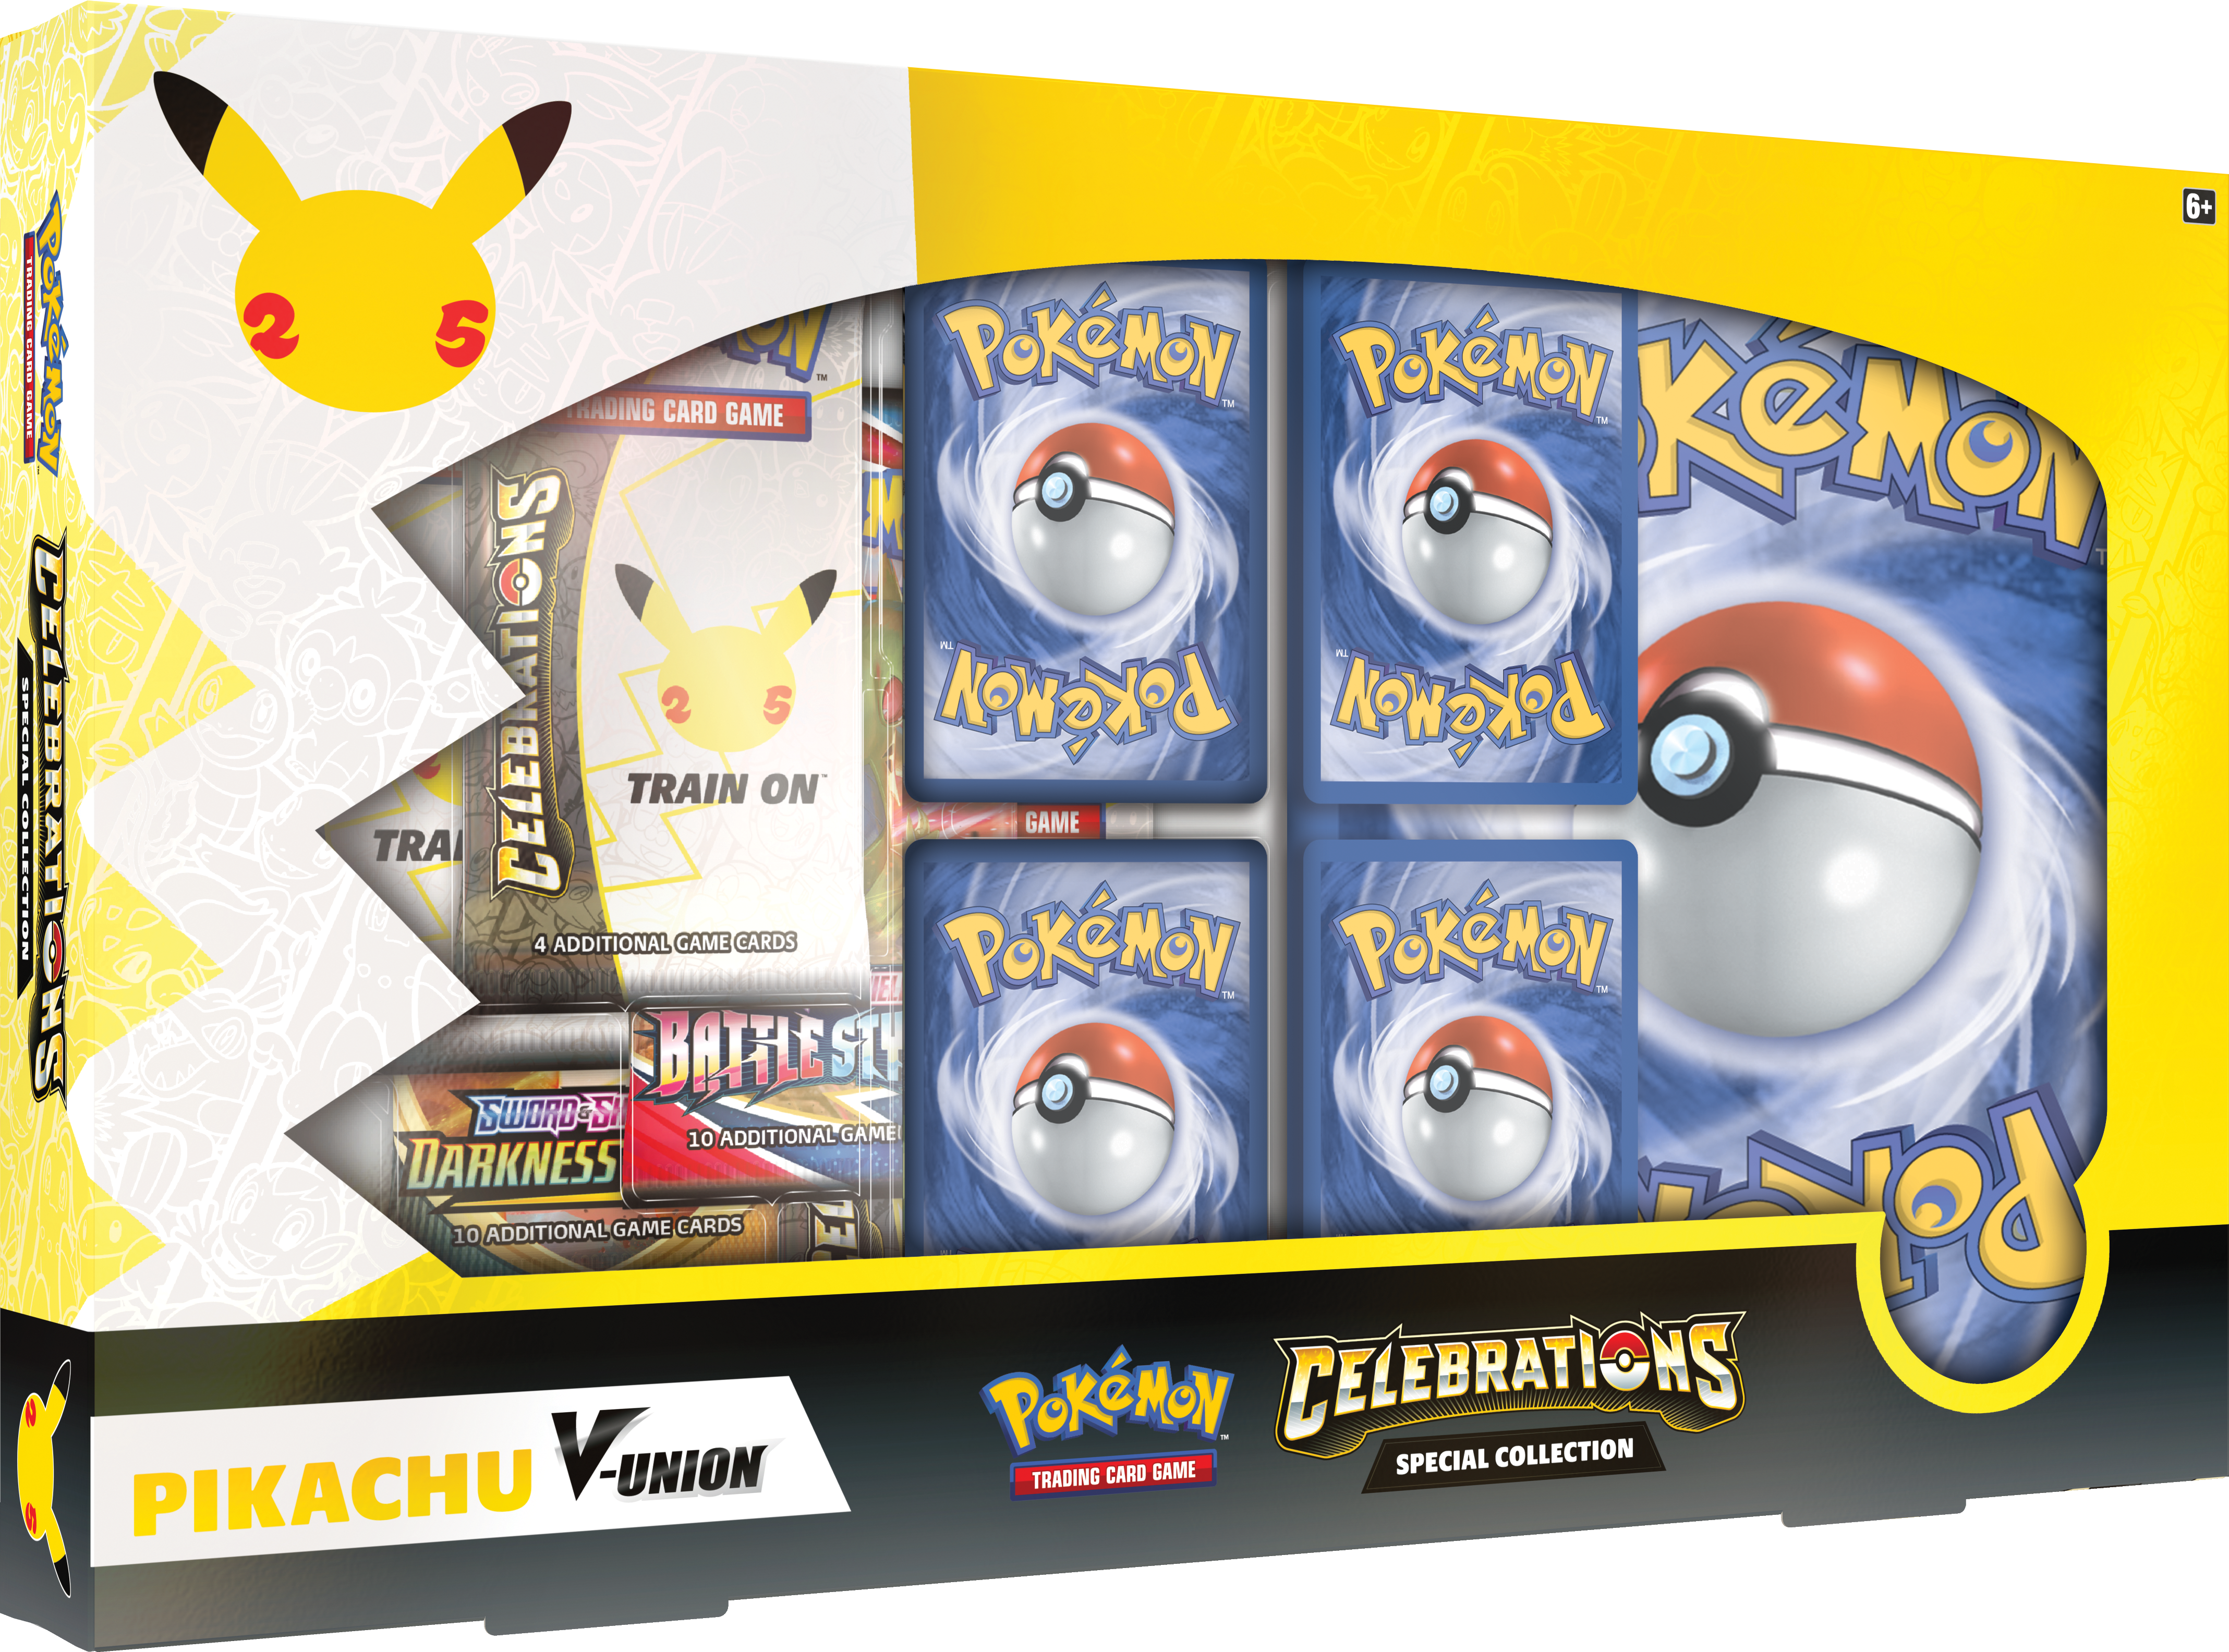 Celebrations Pikachu V Union Special Collection - cheapcards.nl